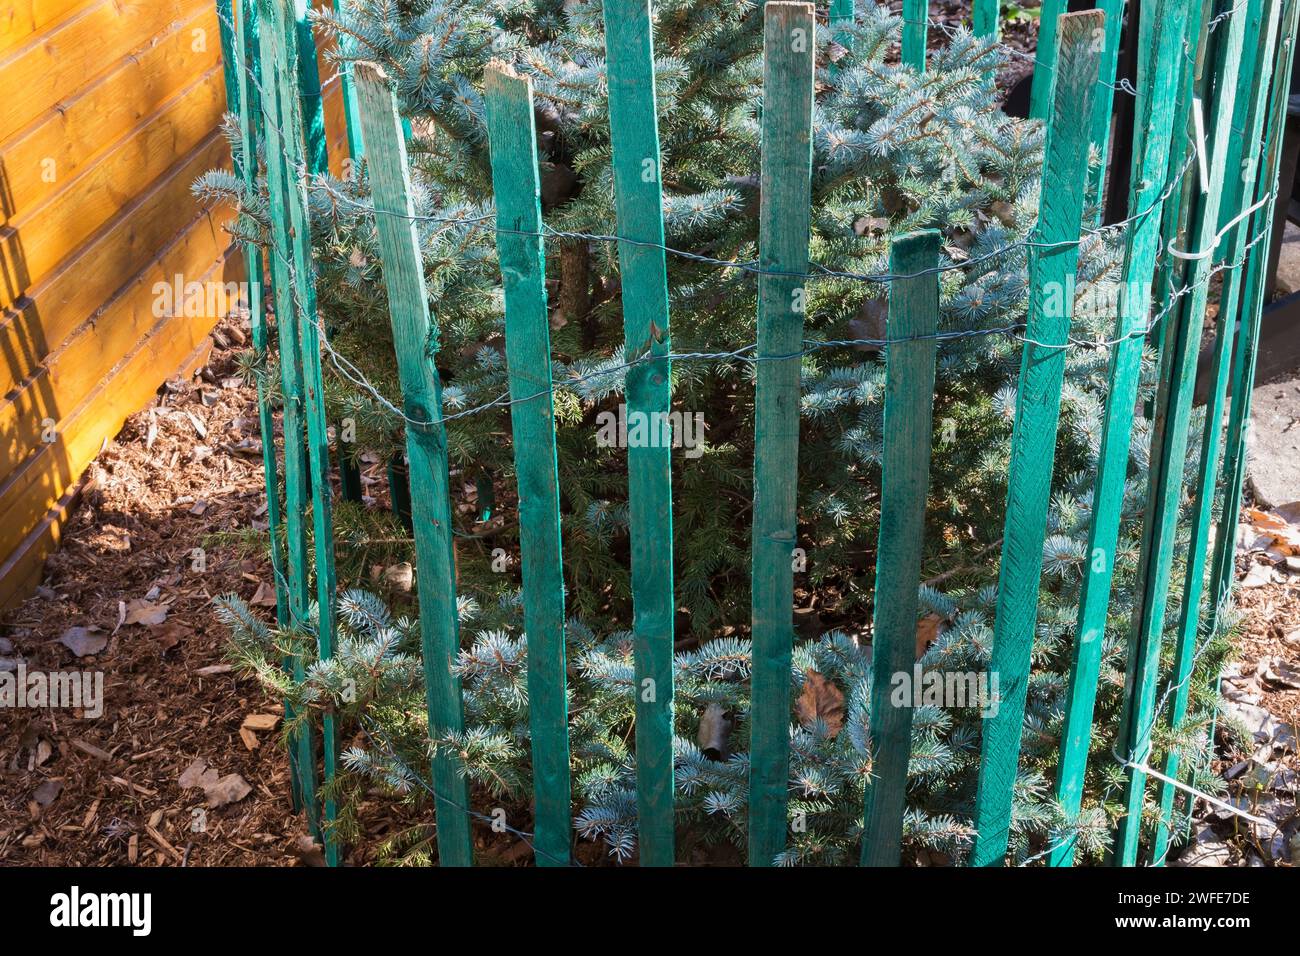 Picea glauca - Blue Colorado Spruce tree protected with green wooden fence to prevent branches from breaking from accumulated heavy ice and snow. Stock Photo